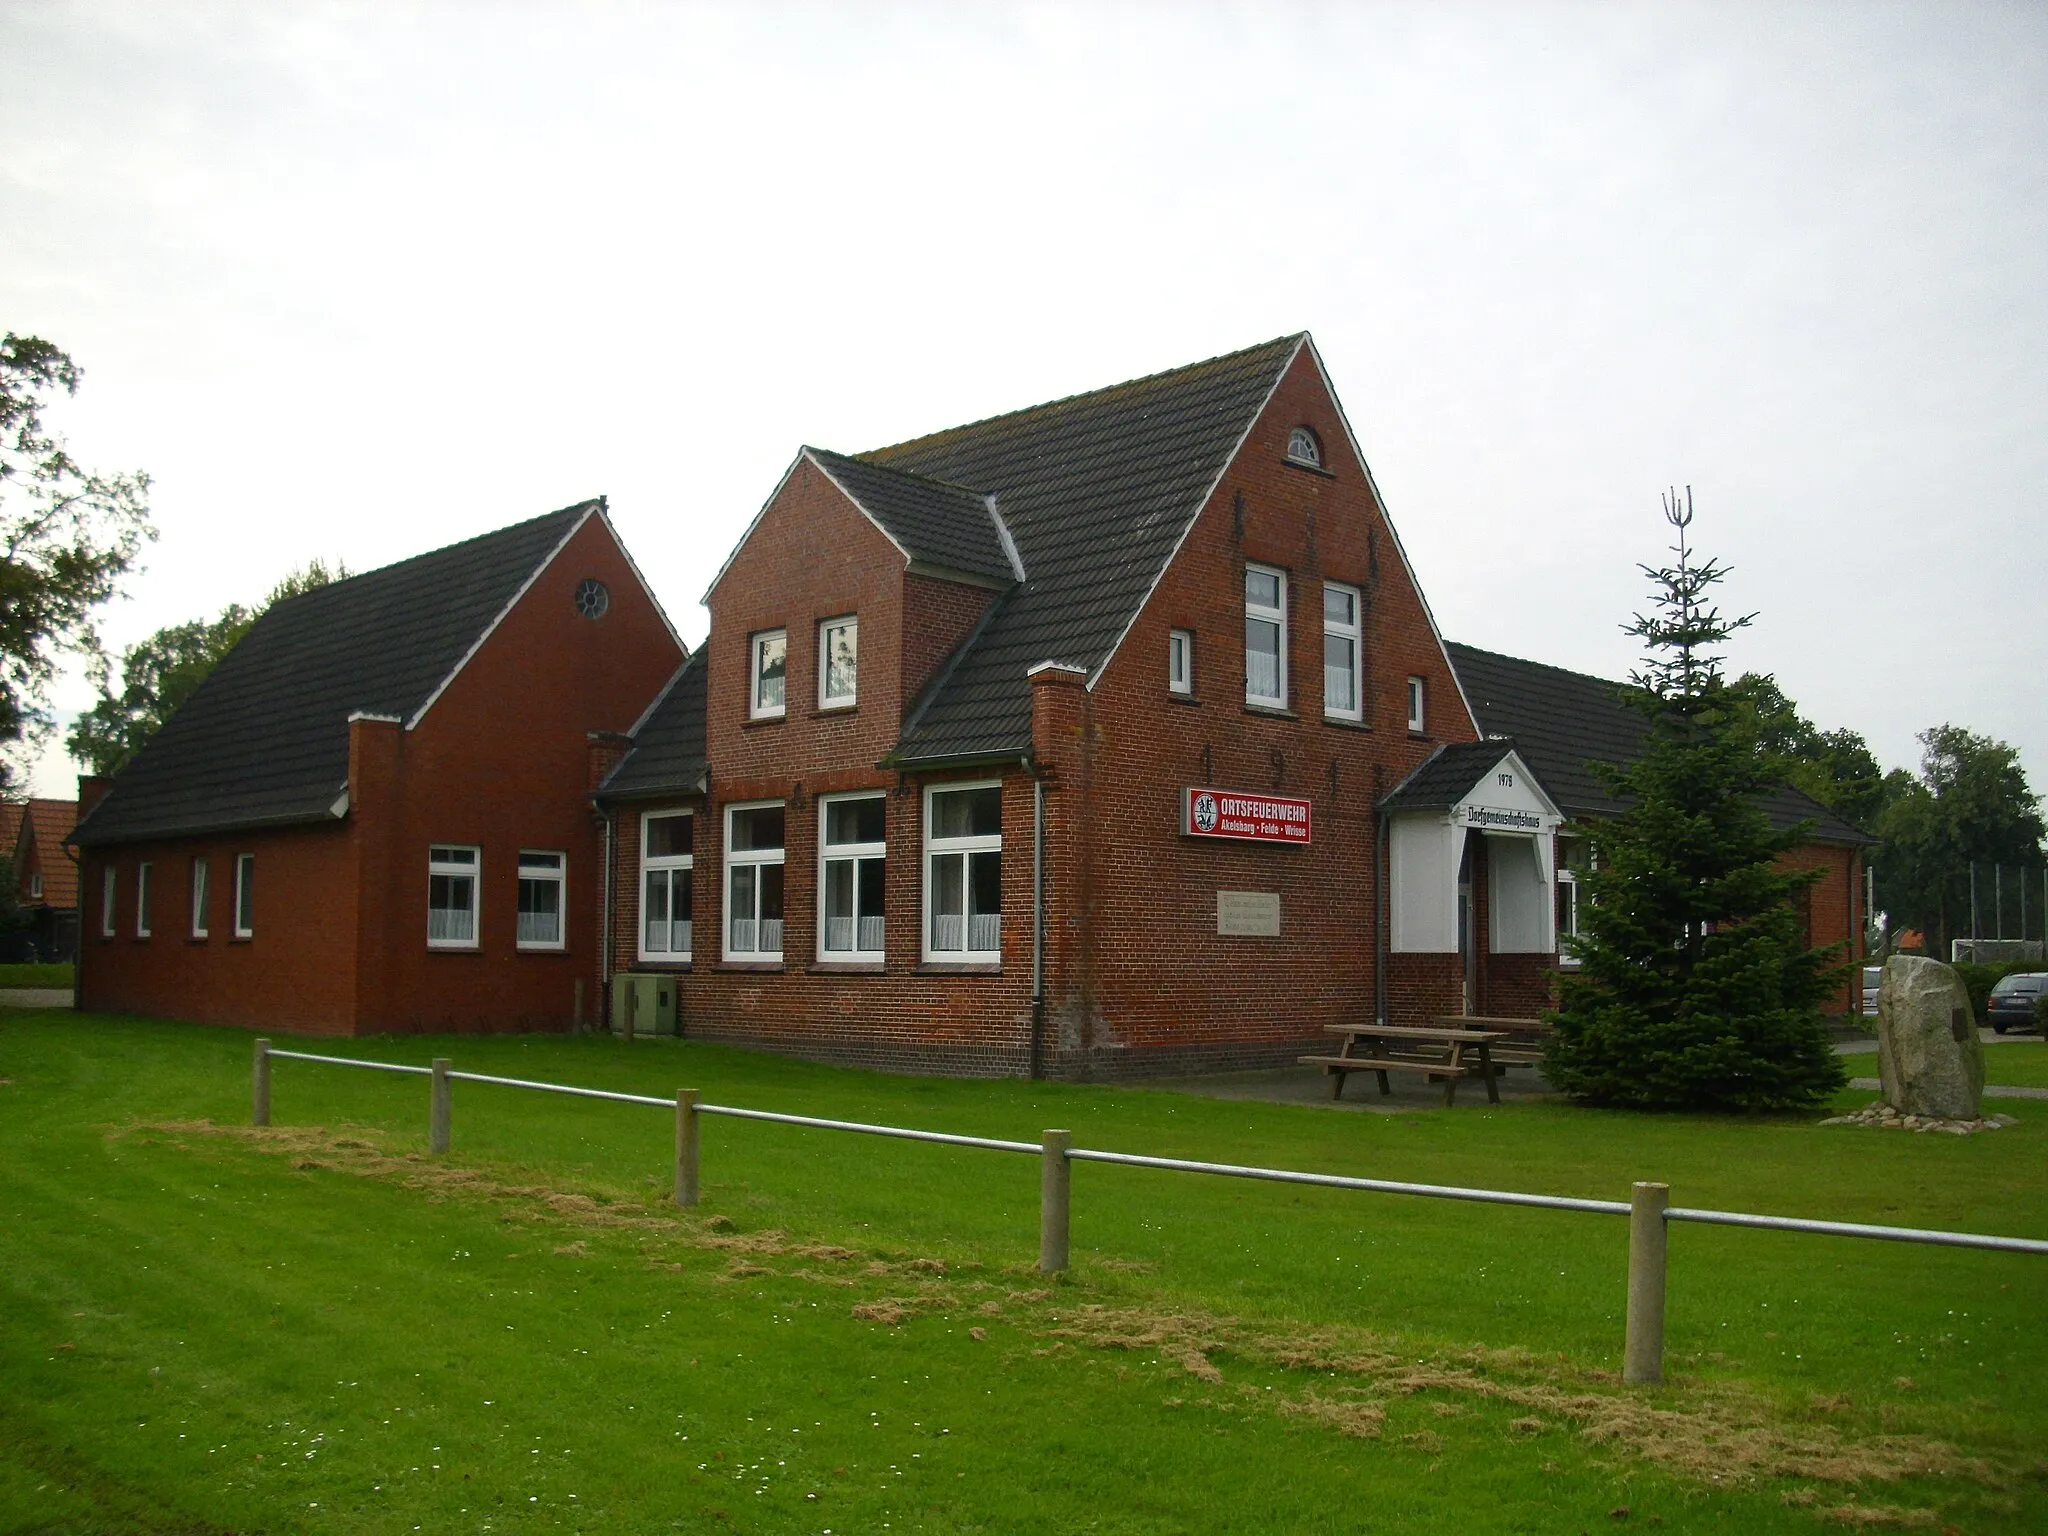 Photo showing: Community centre in Akelsbarg, Großefehn municipality, Rural district Aurich, East Frisia, Lower Saxony, Germany, in October 2015